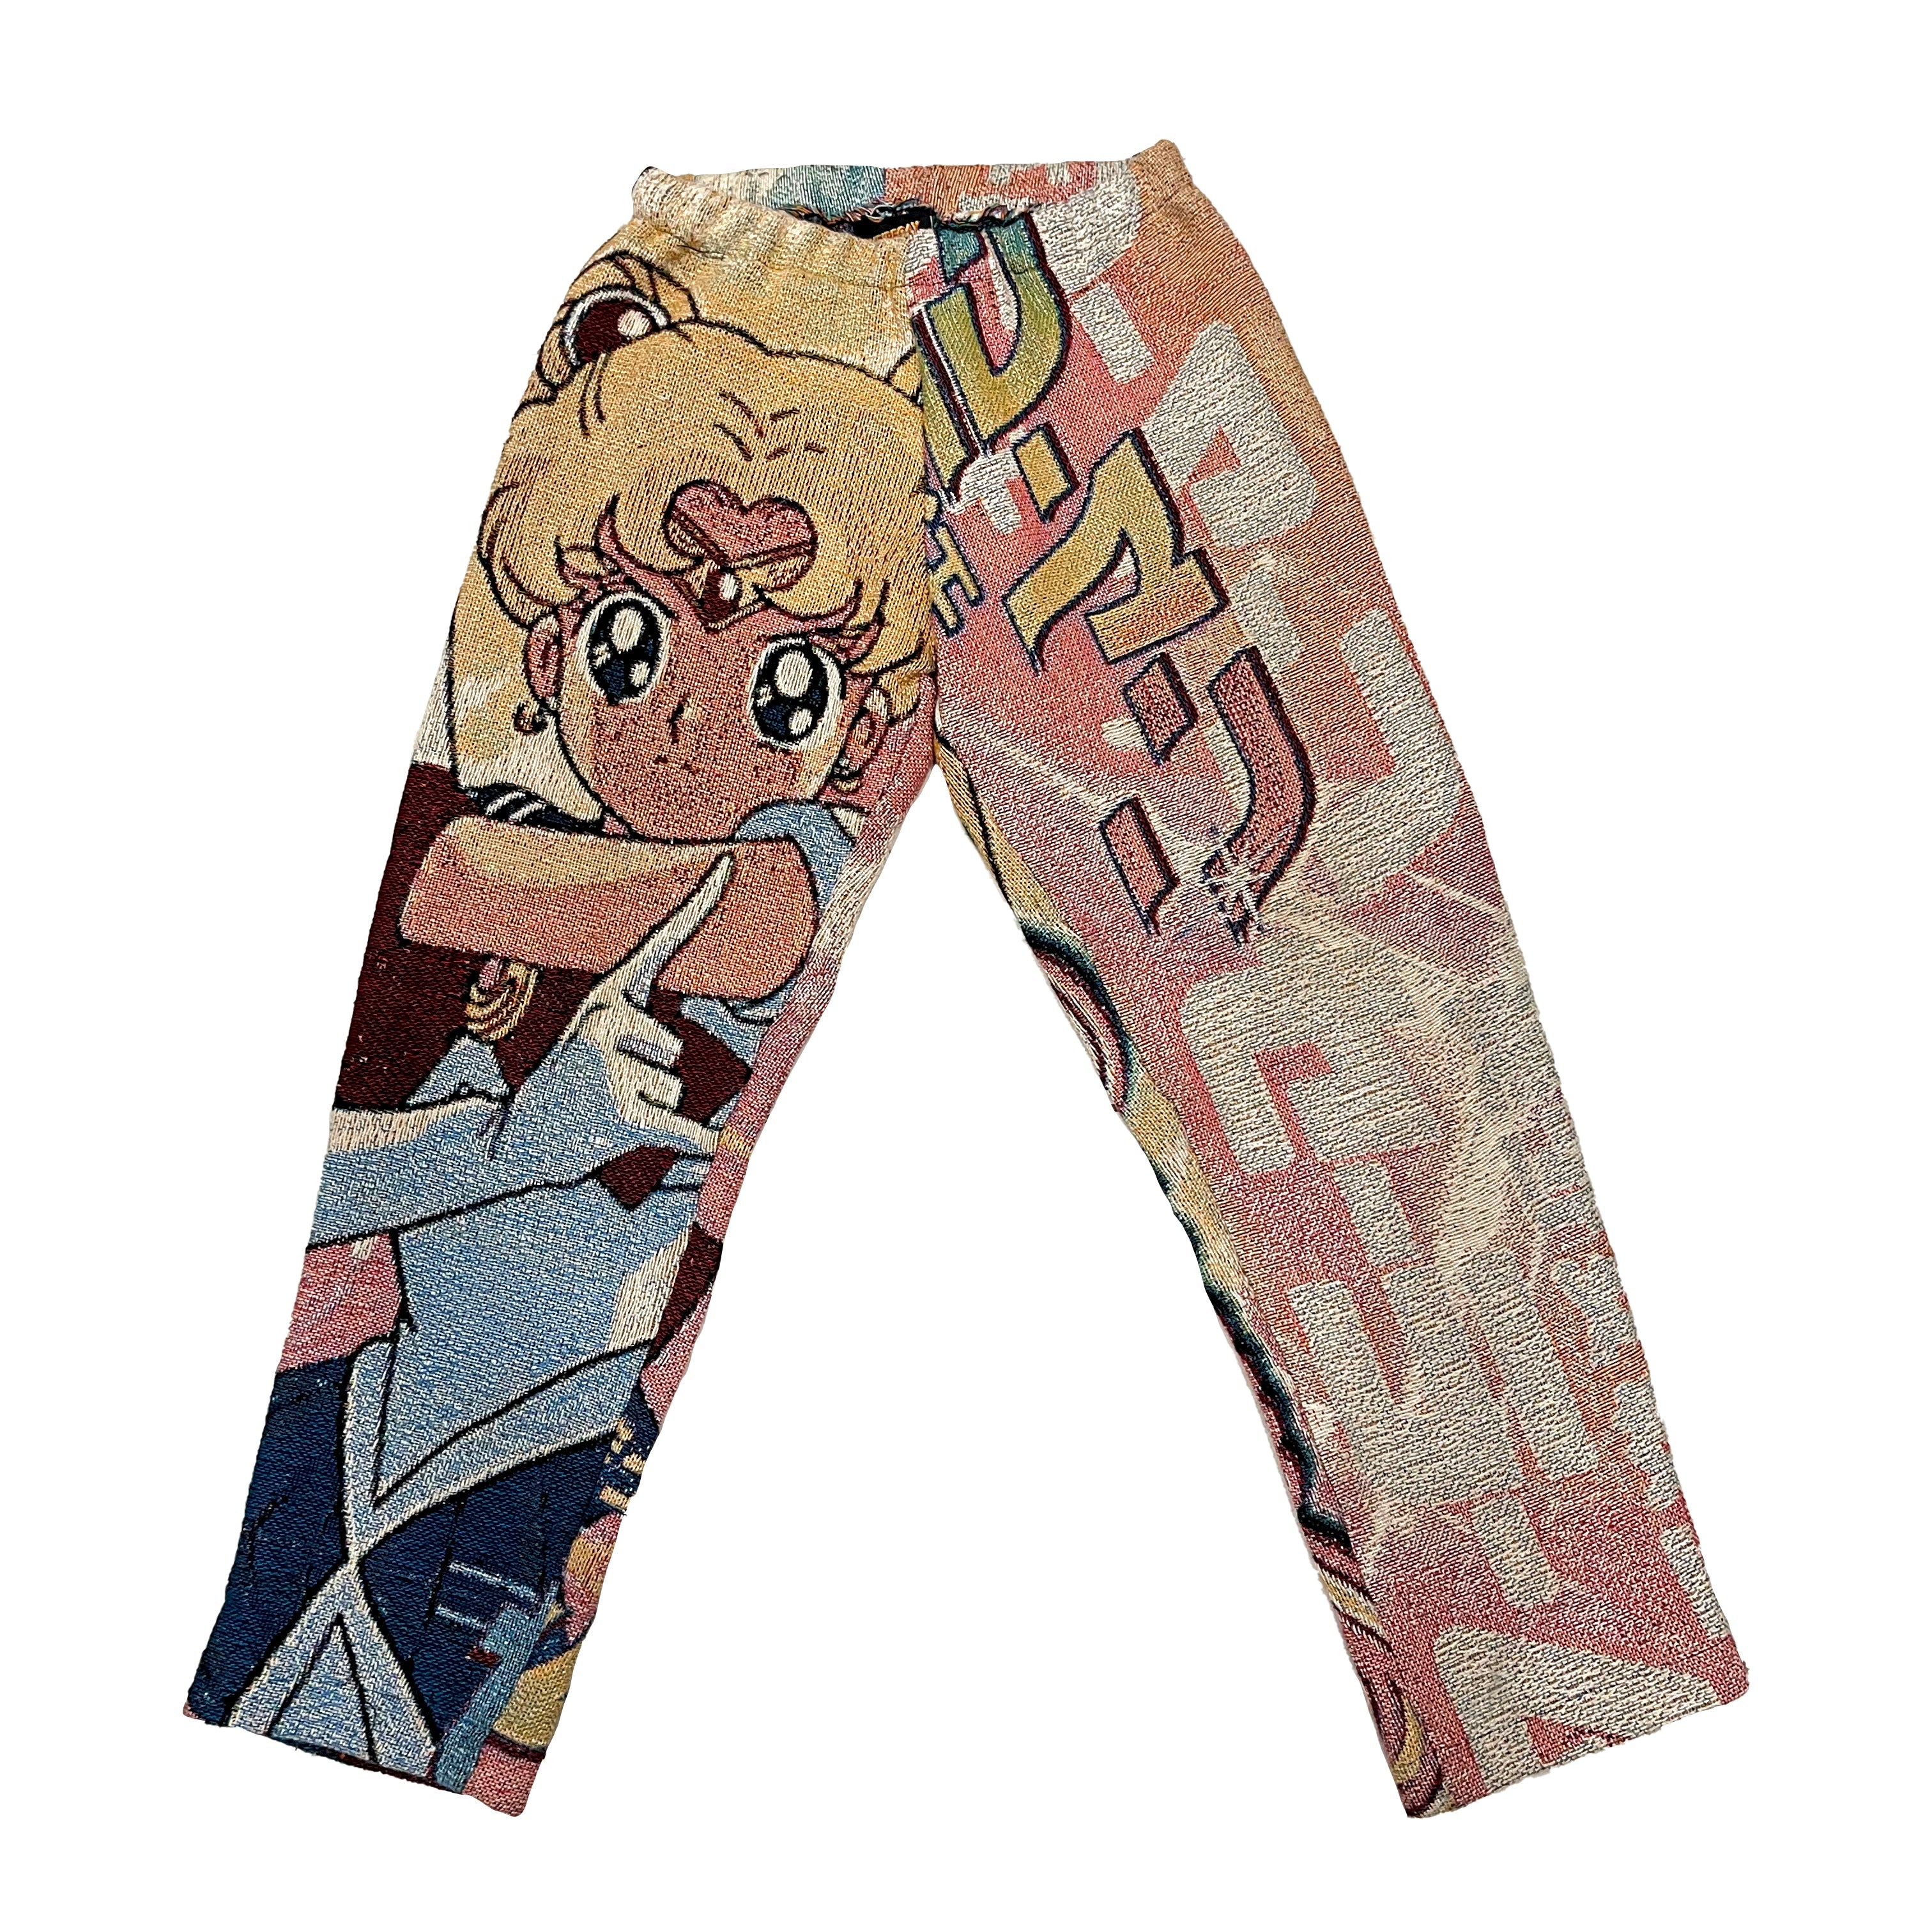 SAILOR MOON WOVEN TAPESTRY PANTS – Lowheads